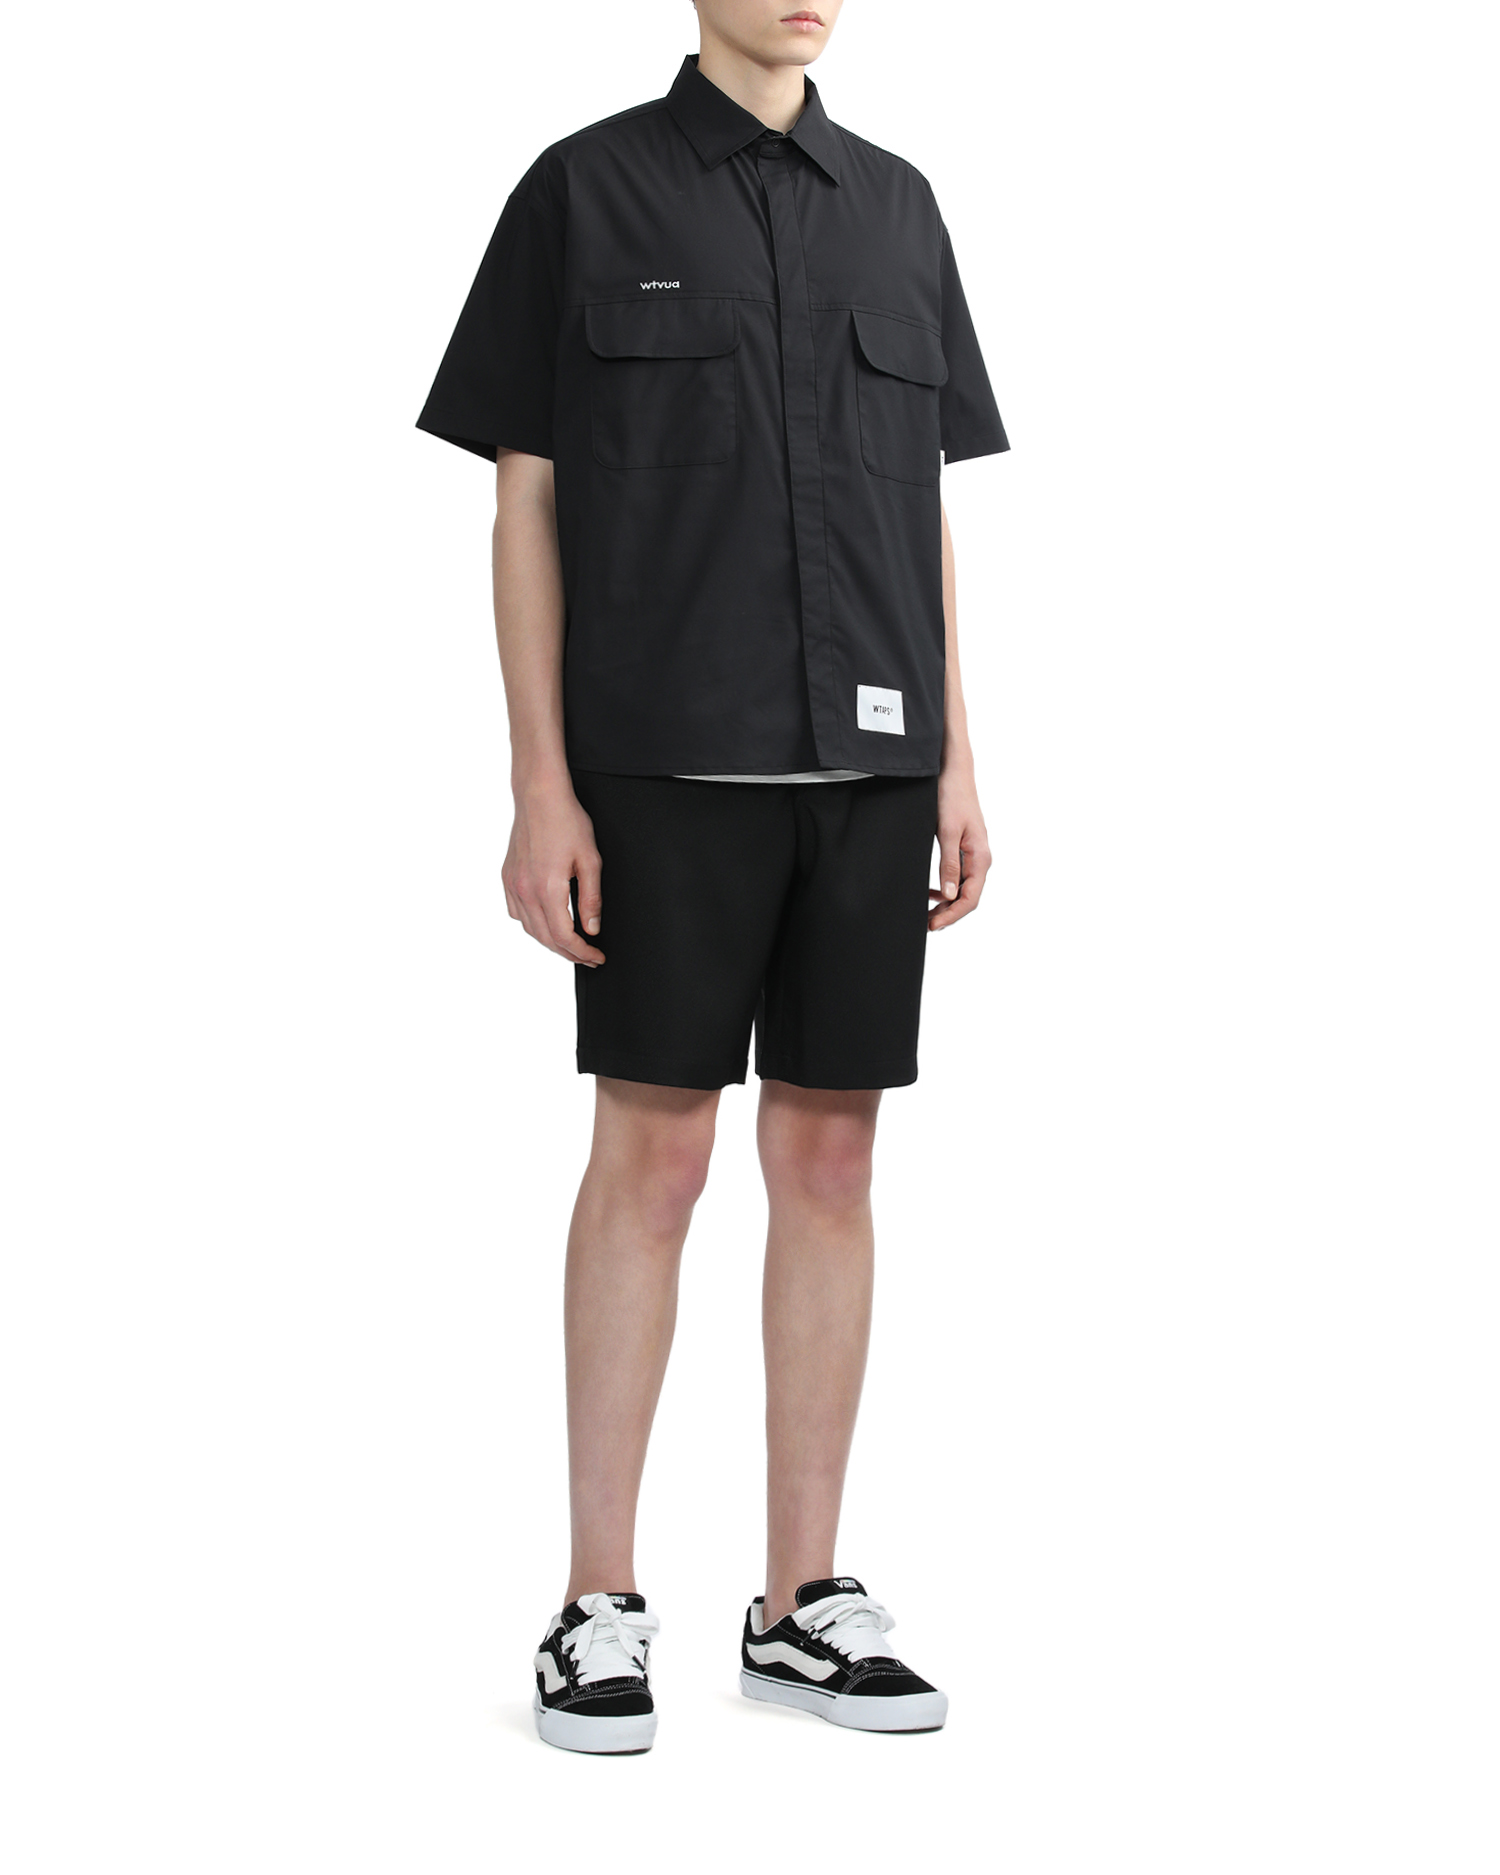 wtaps 22ss LADDER / SS  COPO. BROADCLOTH